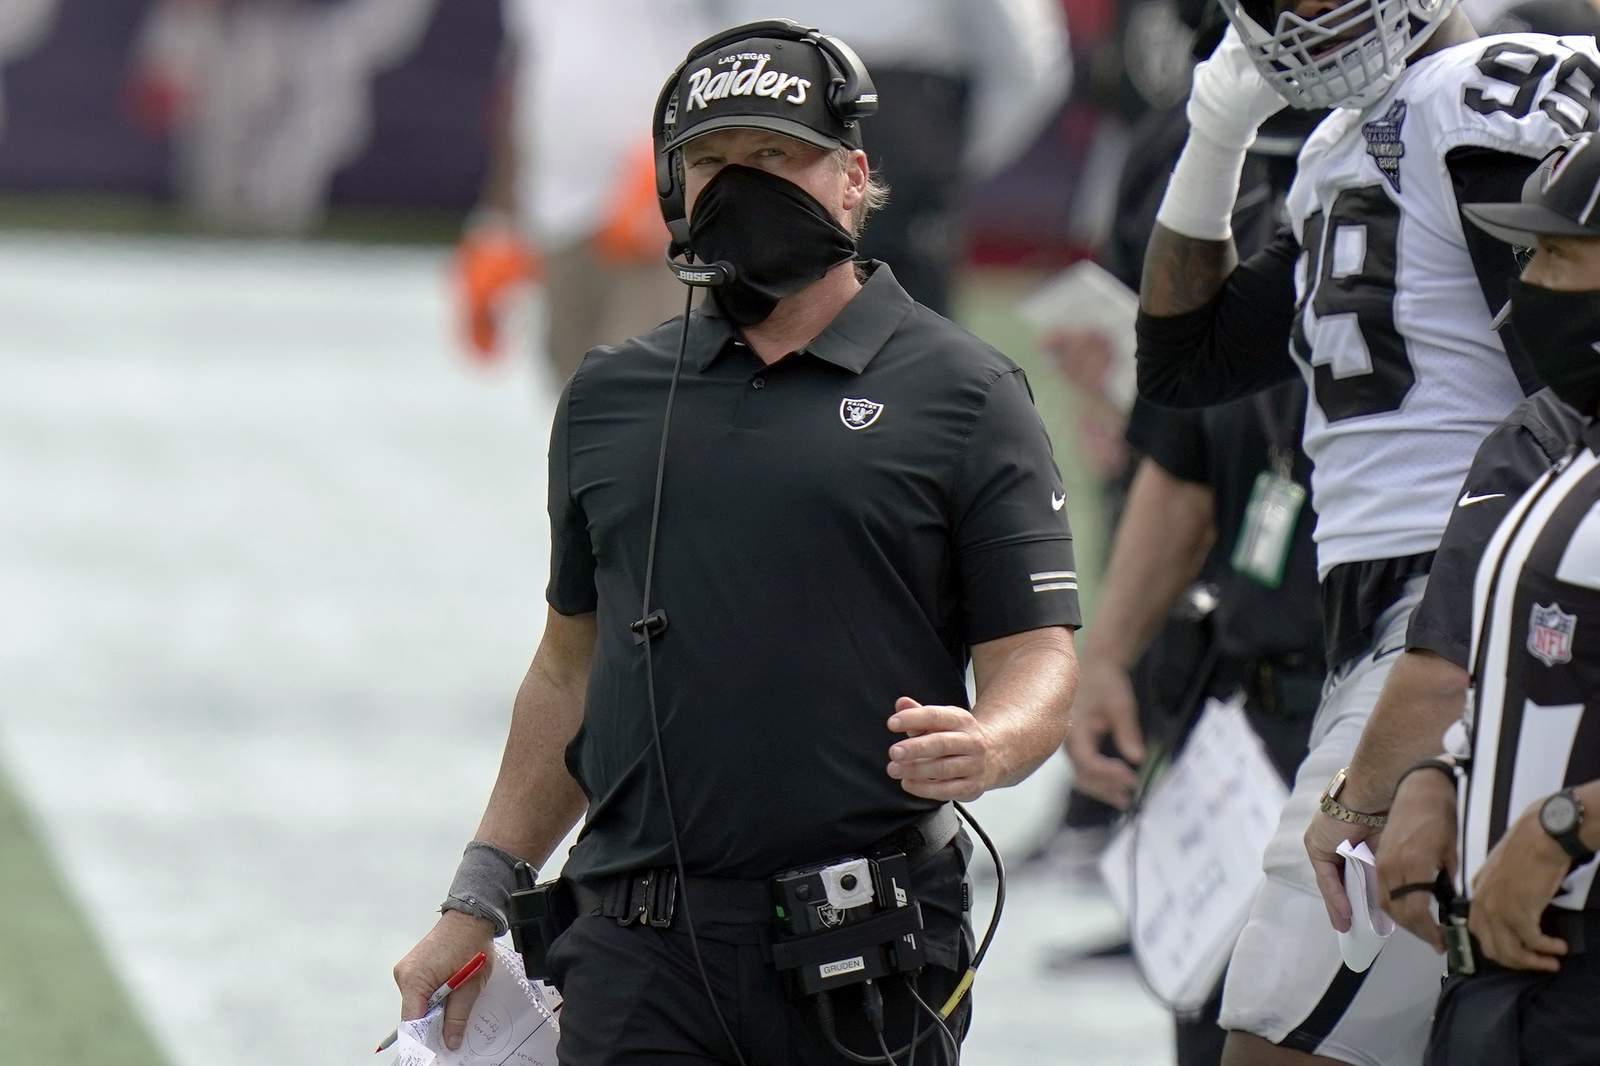 Gruden: Raiders players made 'mistake' not wearing masks